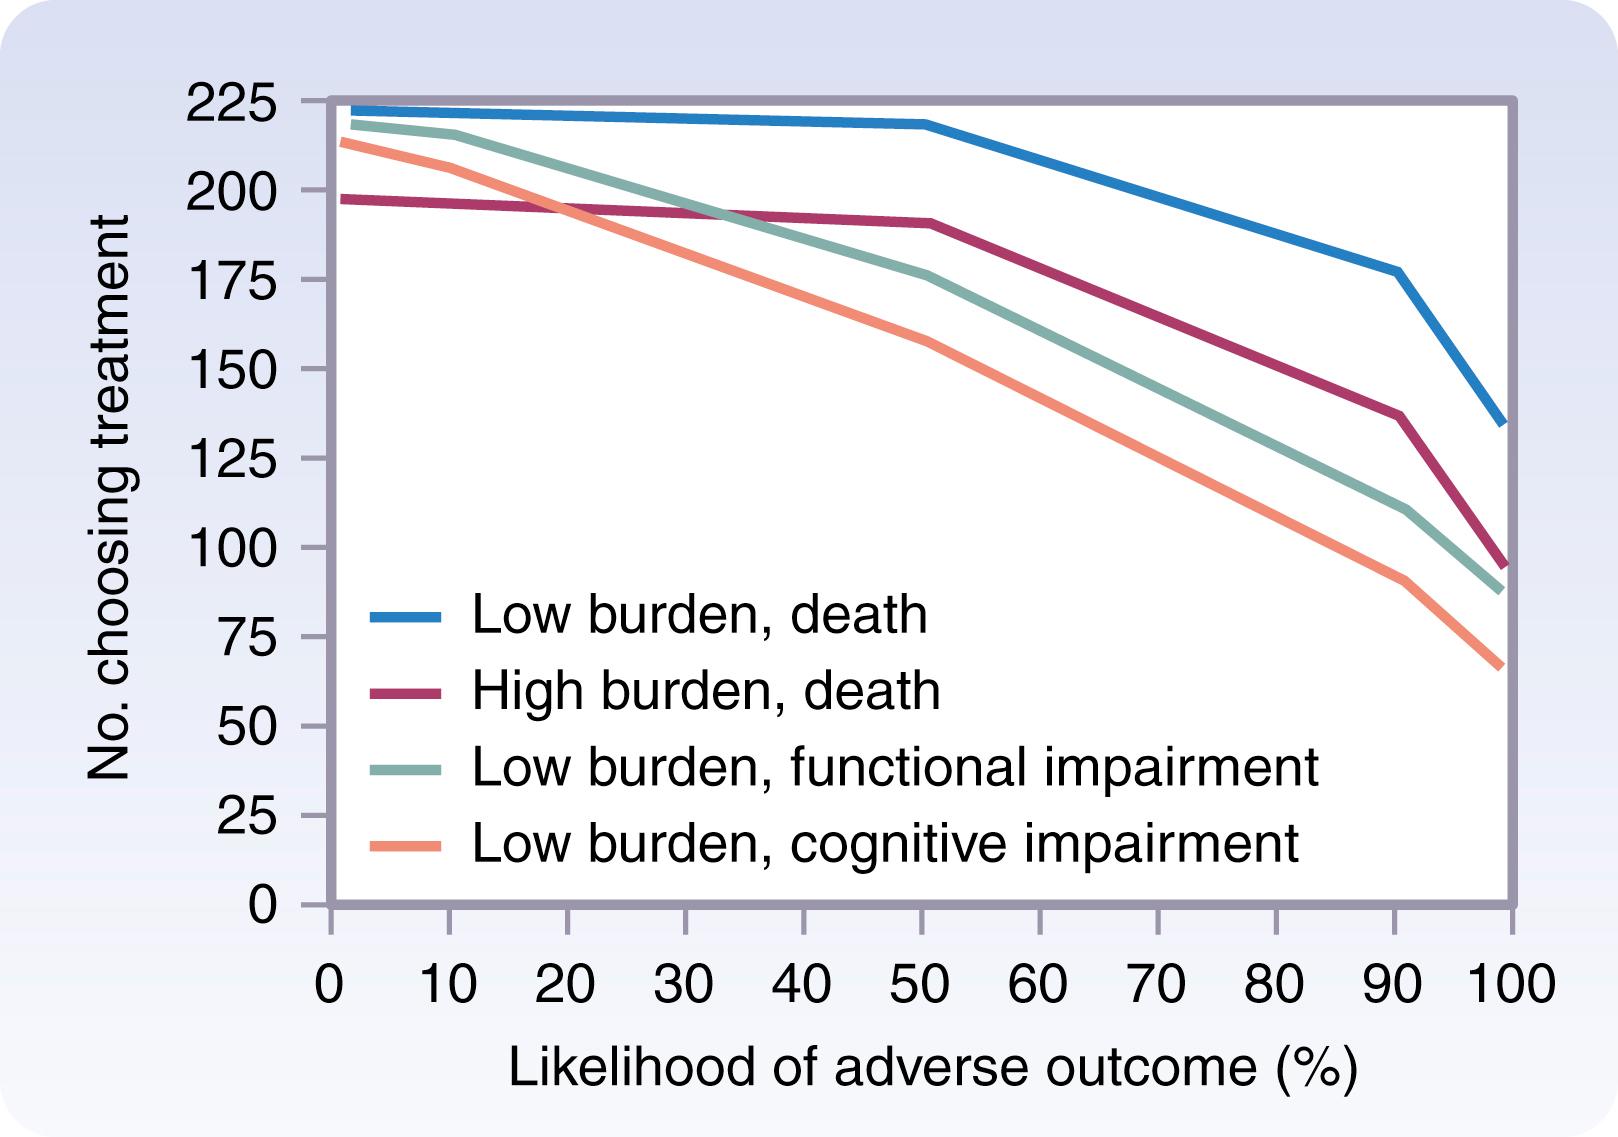 Fig. 13.2, Many patients are willing to undertake high- or low-burden treatments, even if the risk of death is high (up to 50%). However, when there is even a small risk of cognitive or functional decline, the number of patients willing to undergo even a low-burden treatment sharply declines.